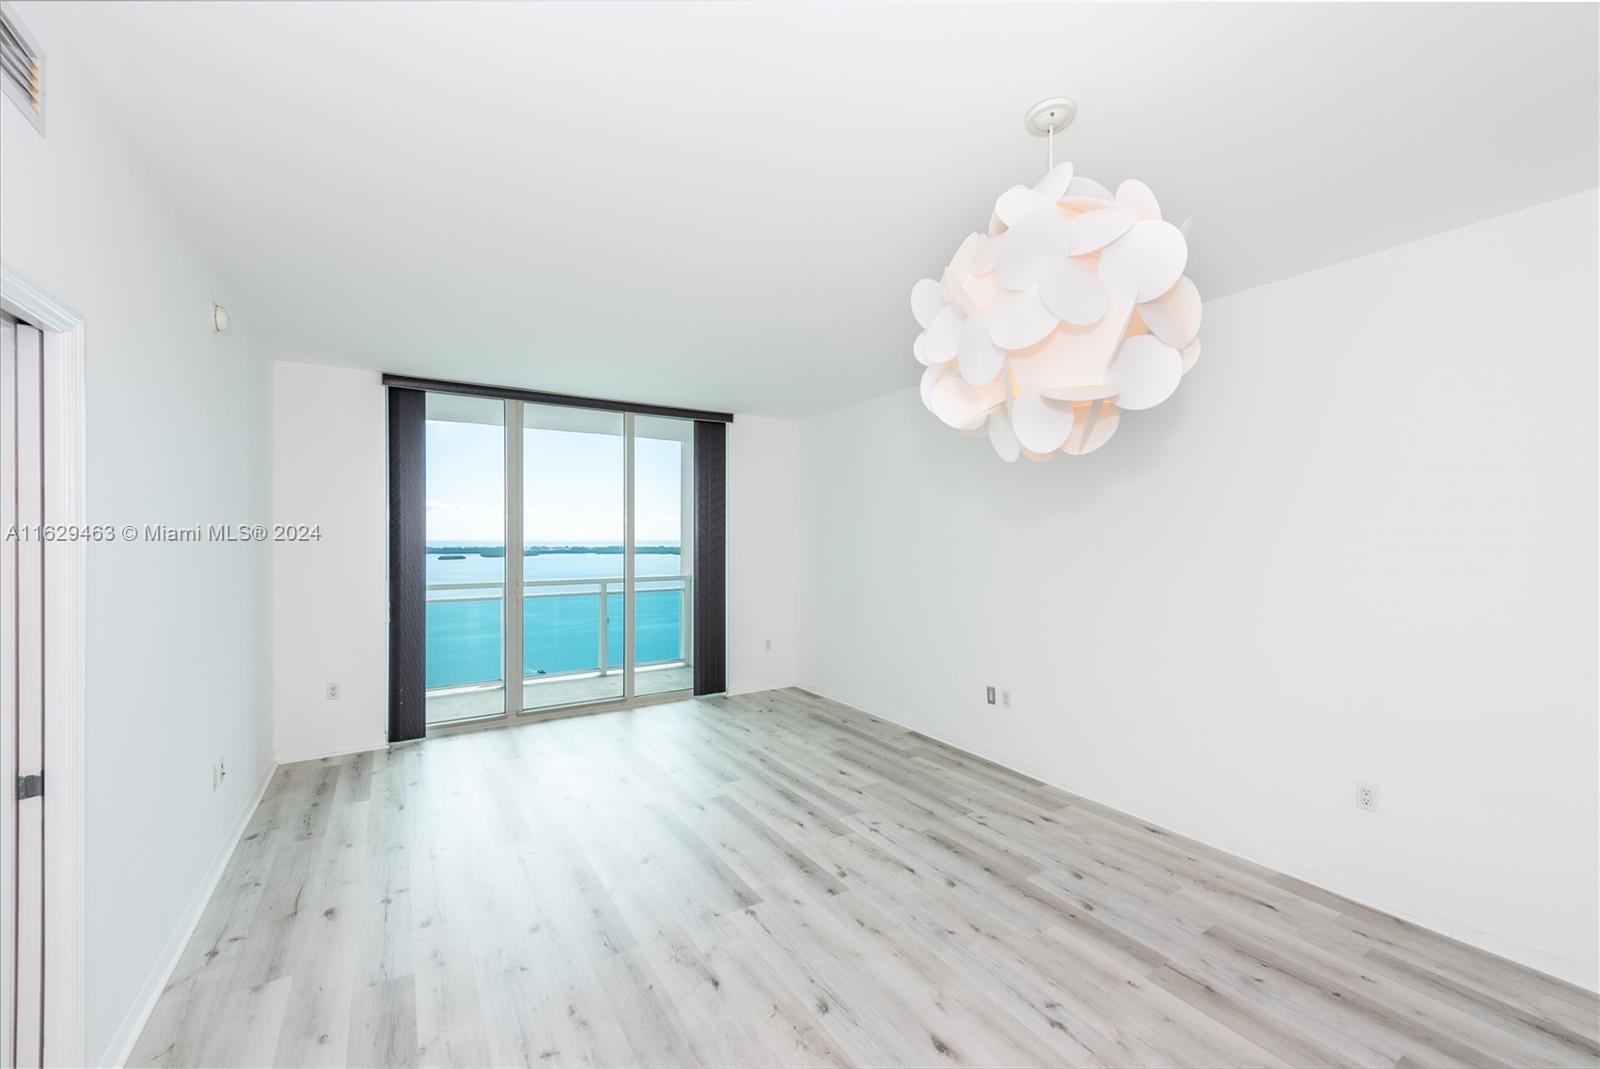 SPECTACULAR VIEWS TO THE OCEAN FROM THE ENTIRE UNIT! 1 BED + 1 BATH - ONE OF THE BIGGEST FLOOR PLANS ON THE BUILDING. Stainless steel appliances, washer & dryer. Amenities incluede pool, sauna, spa & fitness center. 24hs Lobby Attendent & valet parking. AVAILABLE OCTOBER 17th 2024.